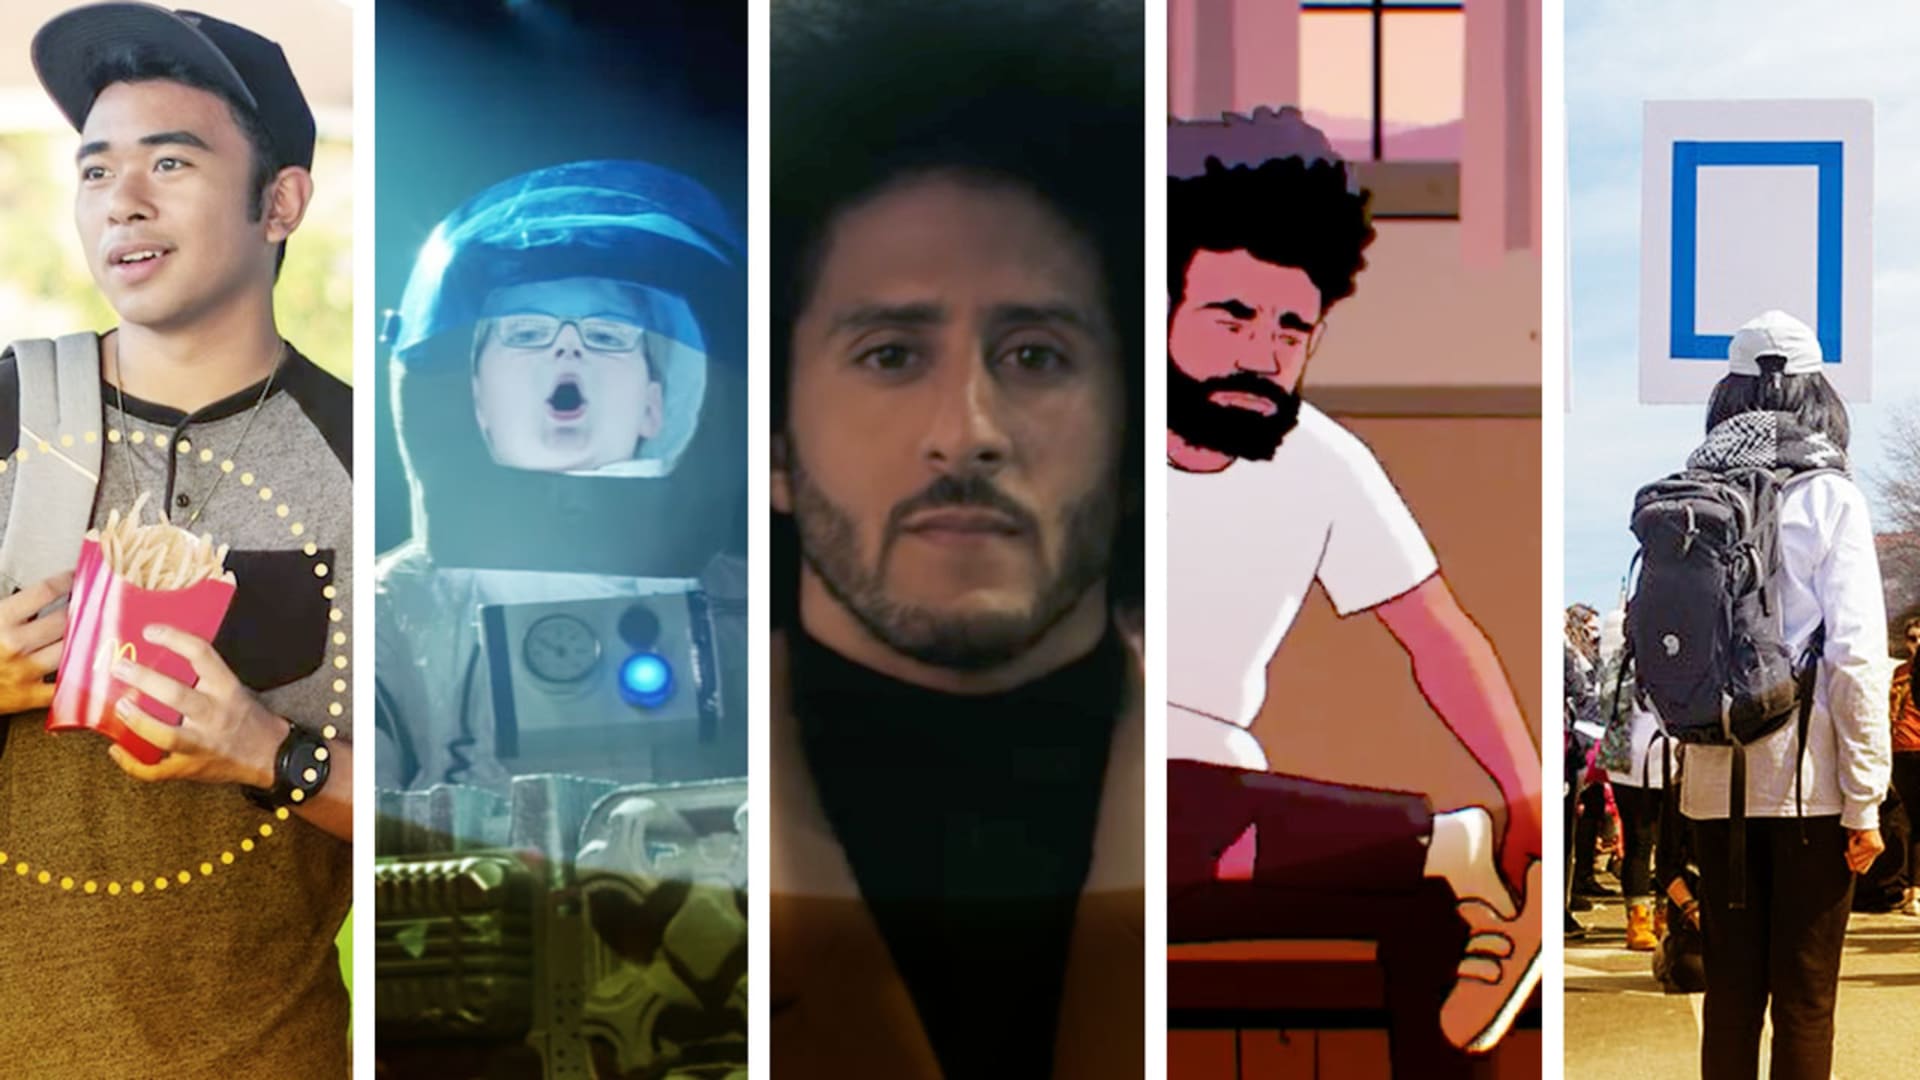 Top 5 ads of the week: Nike and Colin Kaepernick, Adidas and Donald Glover